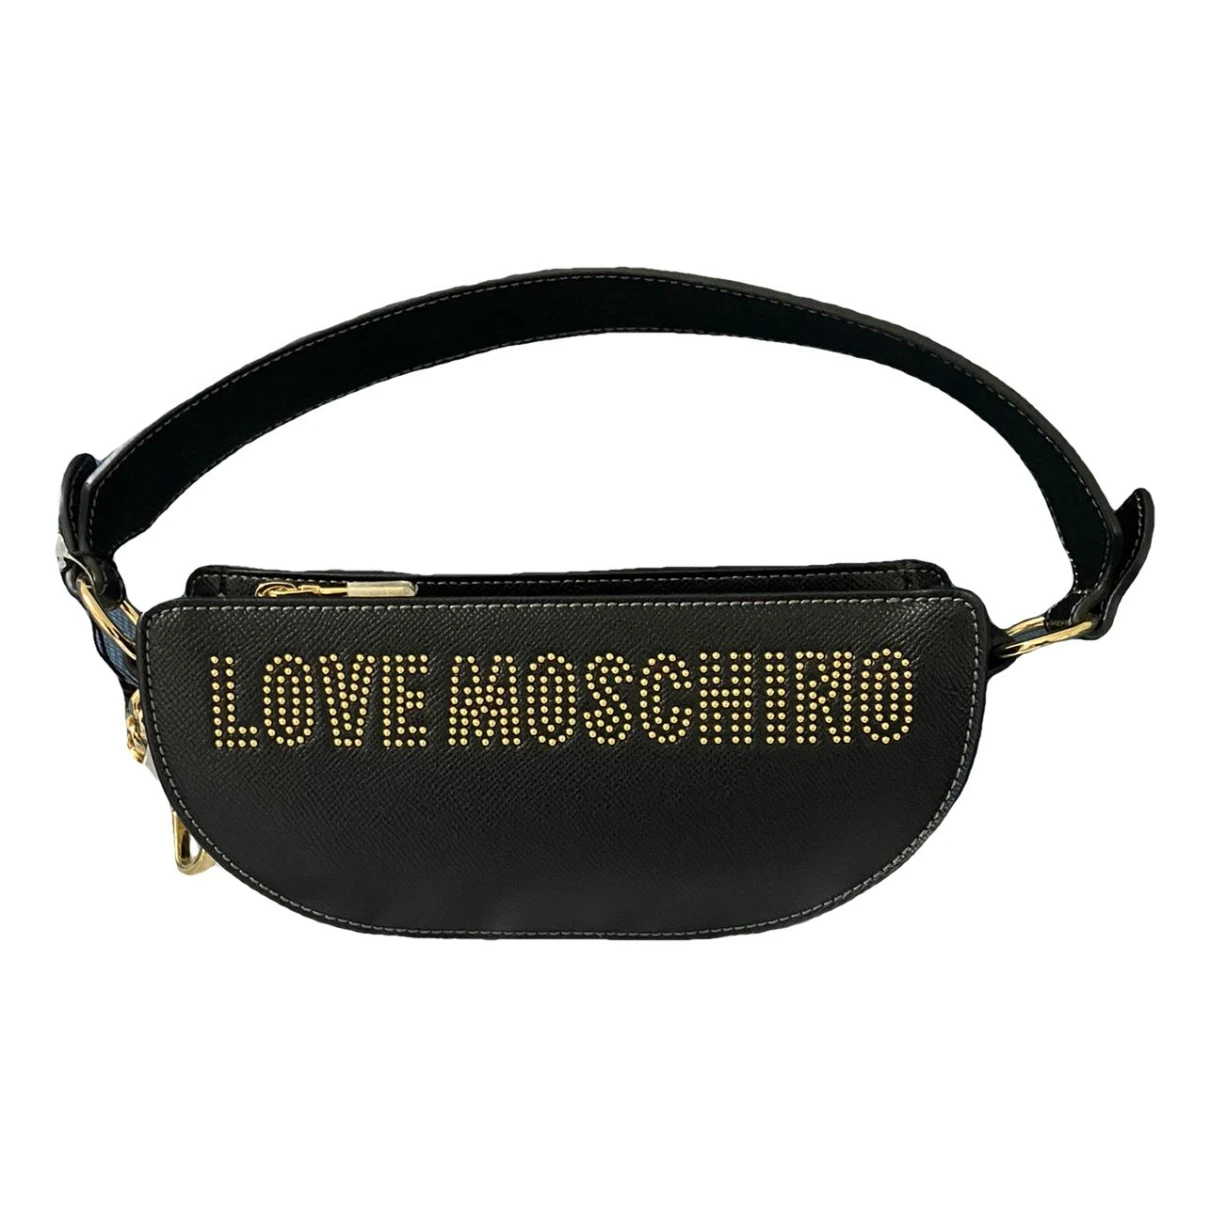 Pre-owned Moschino Love Crossbody Bag In Black